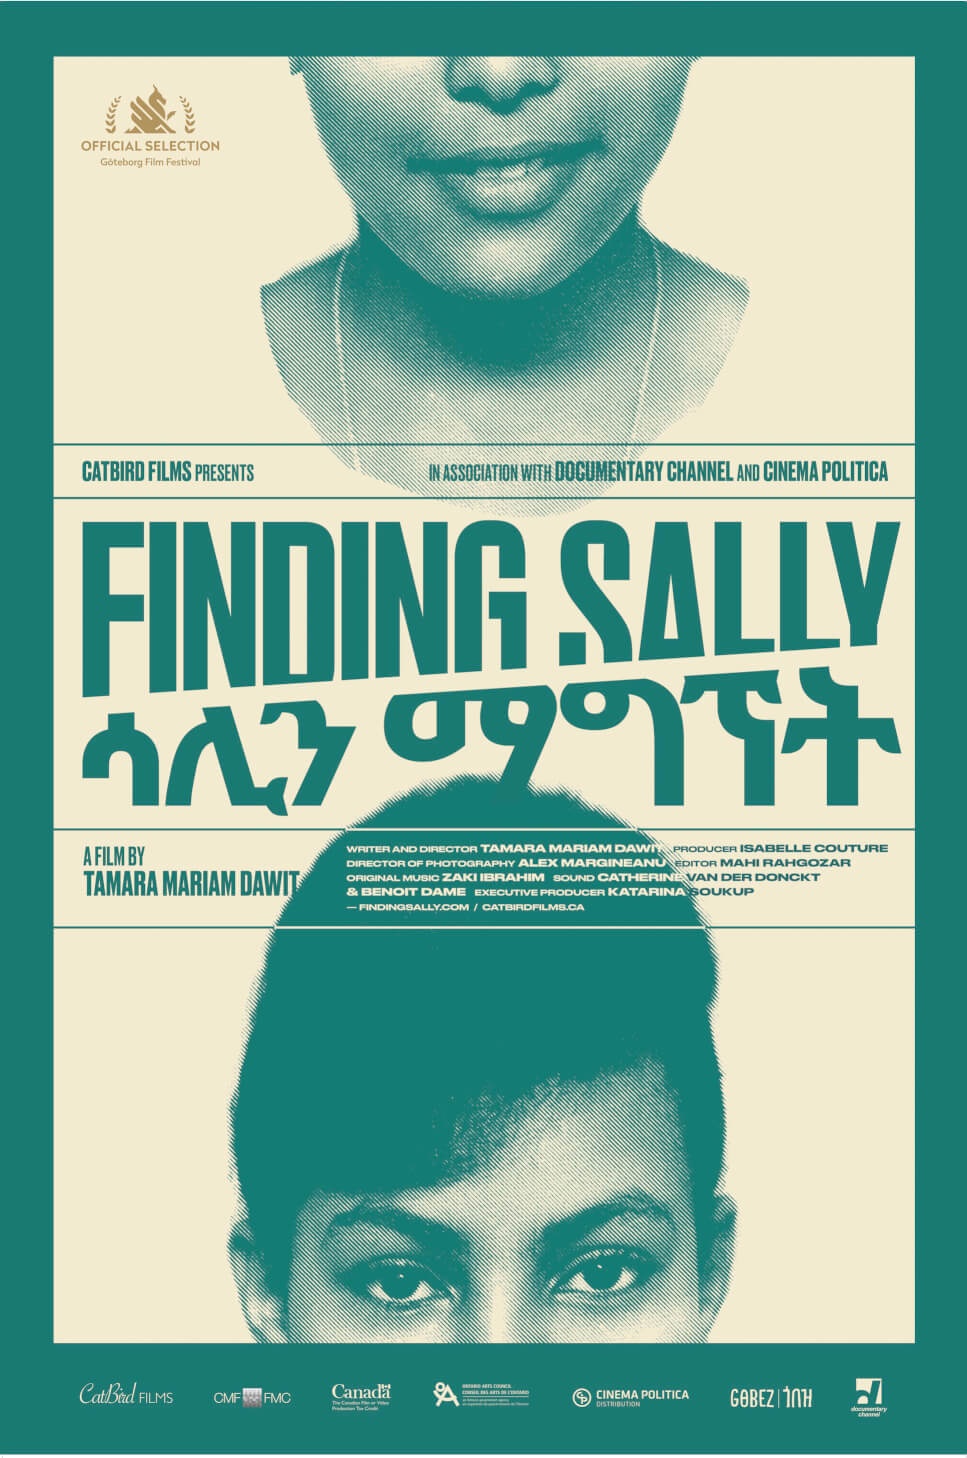 Finding Sally directed by Tamara Dawit